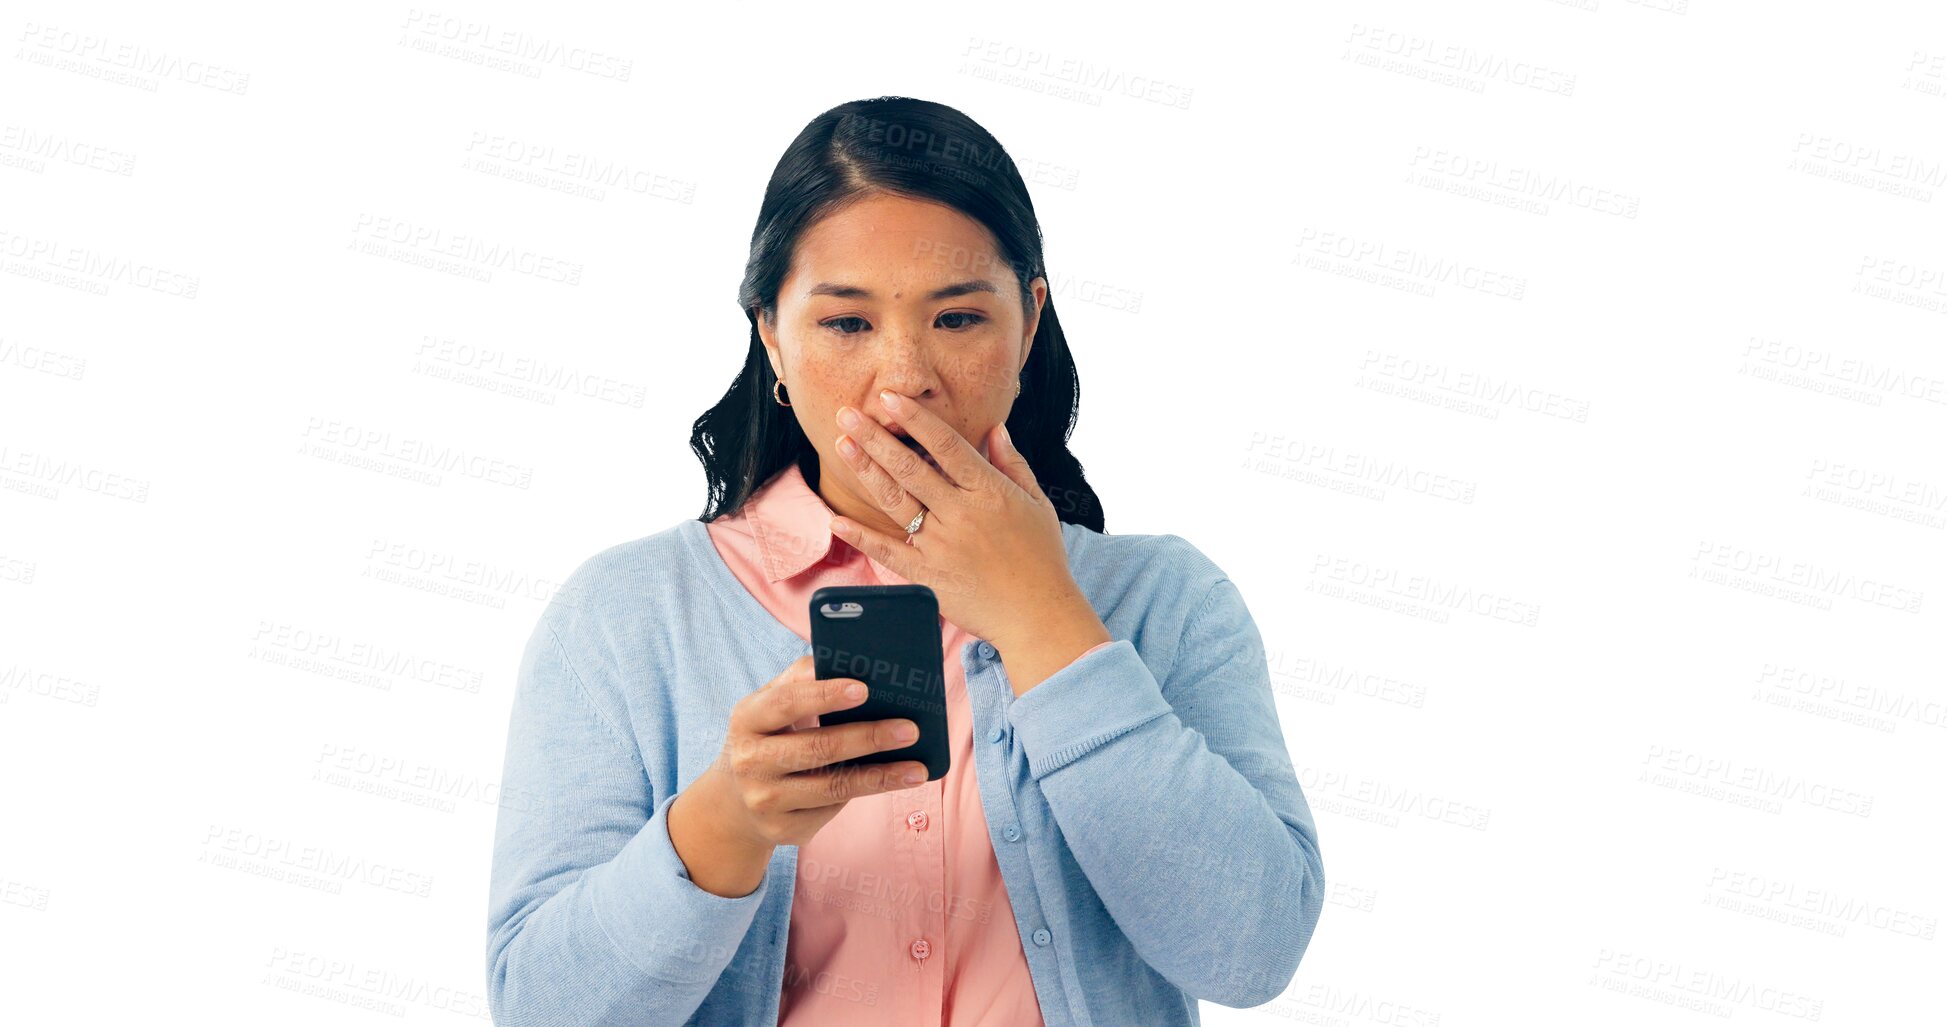 Buy stock photo Woman, shocked and reading fake news on cellphone, alarm and message of subscription to online scam. Japanese lady, surprise and notification on mobile app and isolated on transparent png background